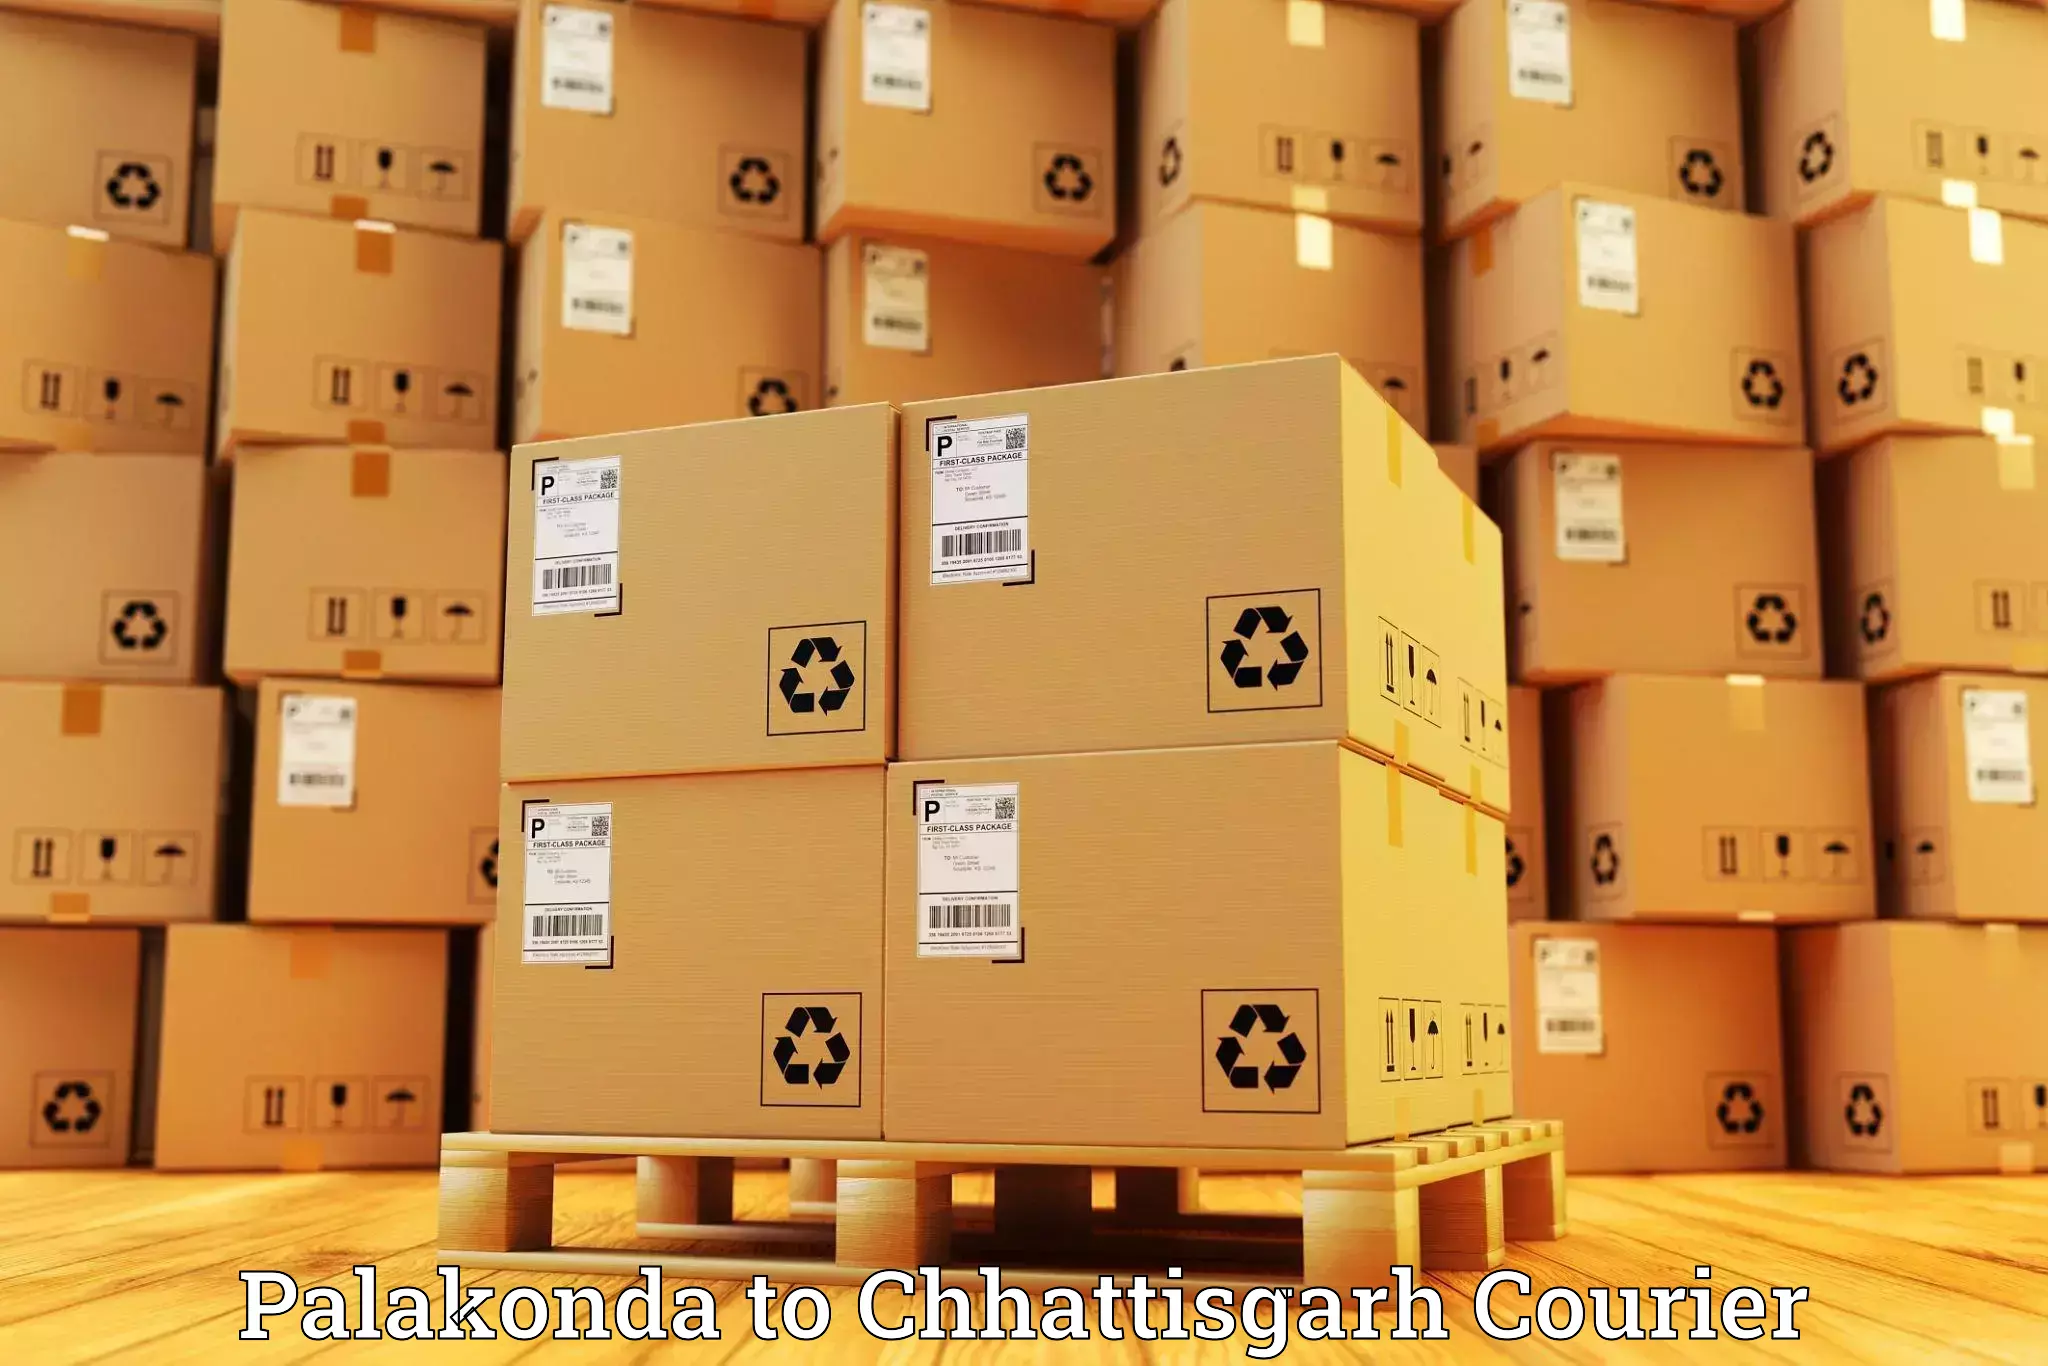 Package delivery network Palakonda to Chhattisgarh